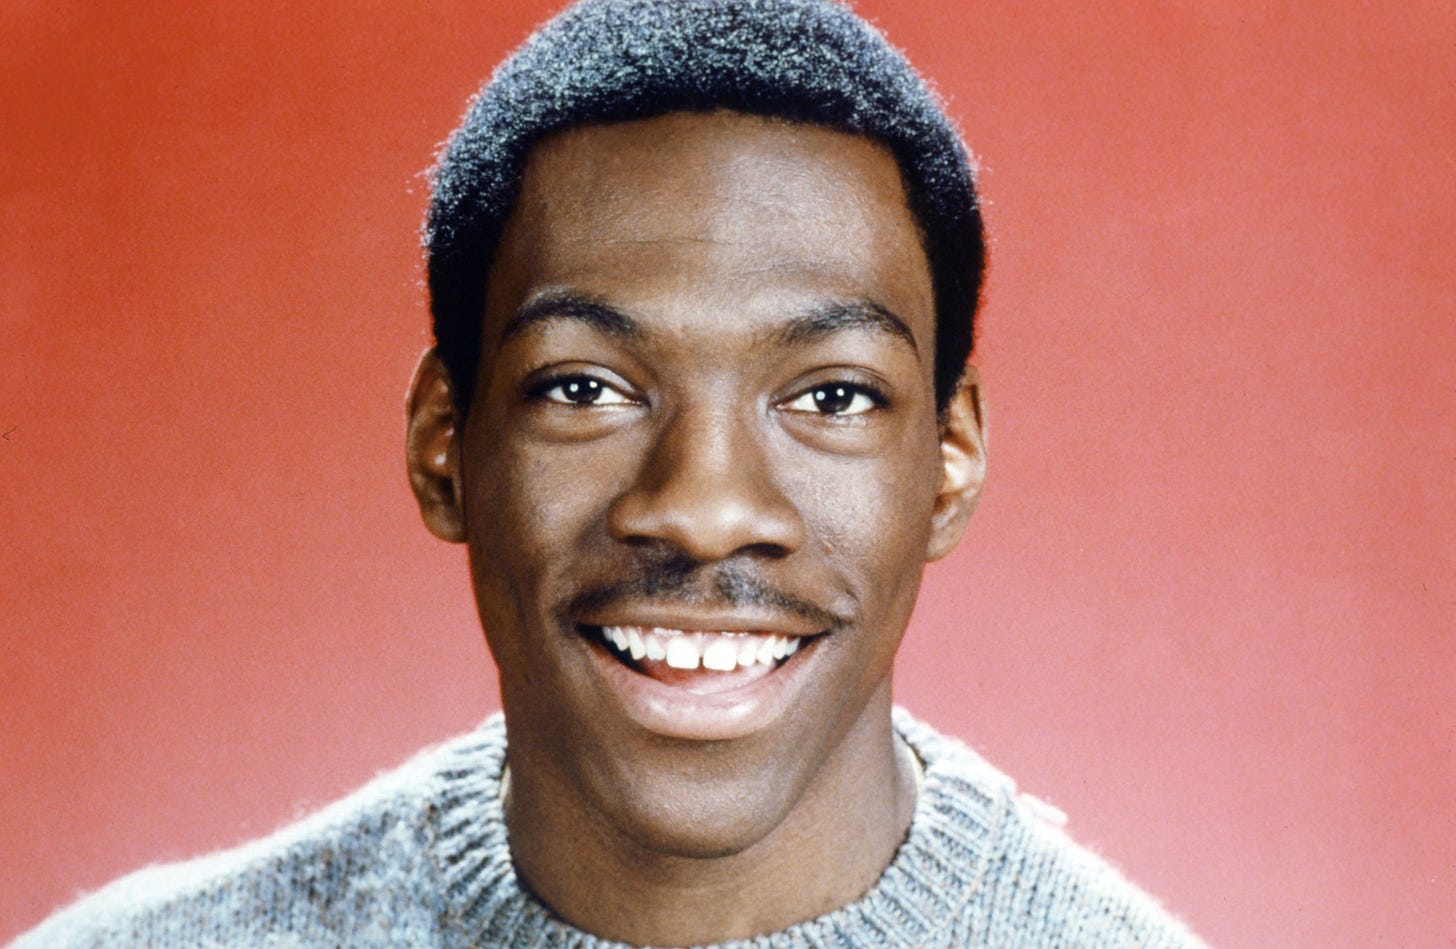 The life and career of Eddie Murphy